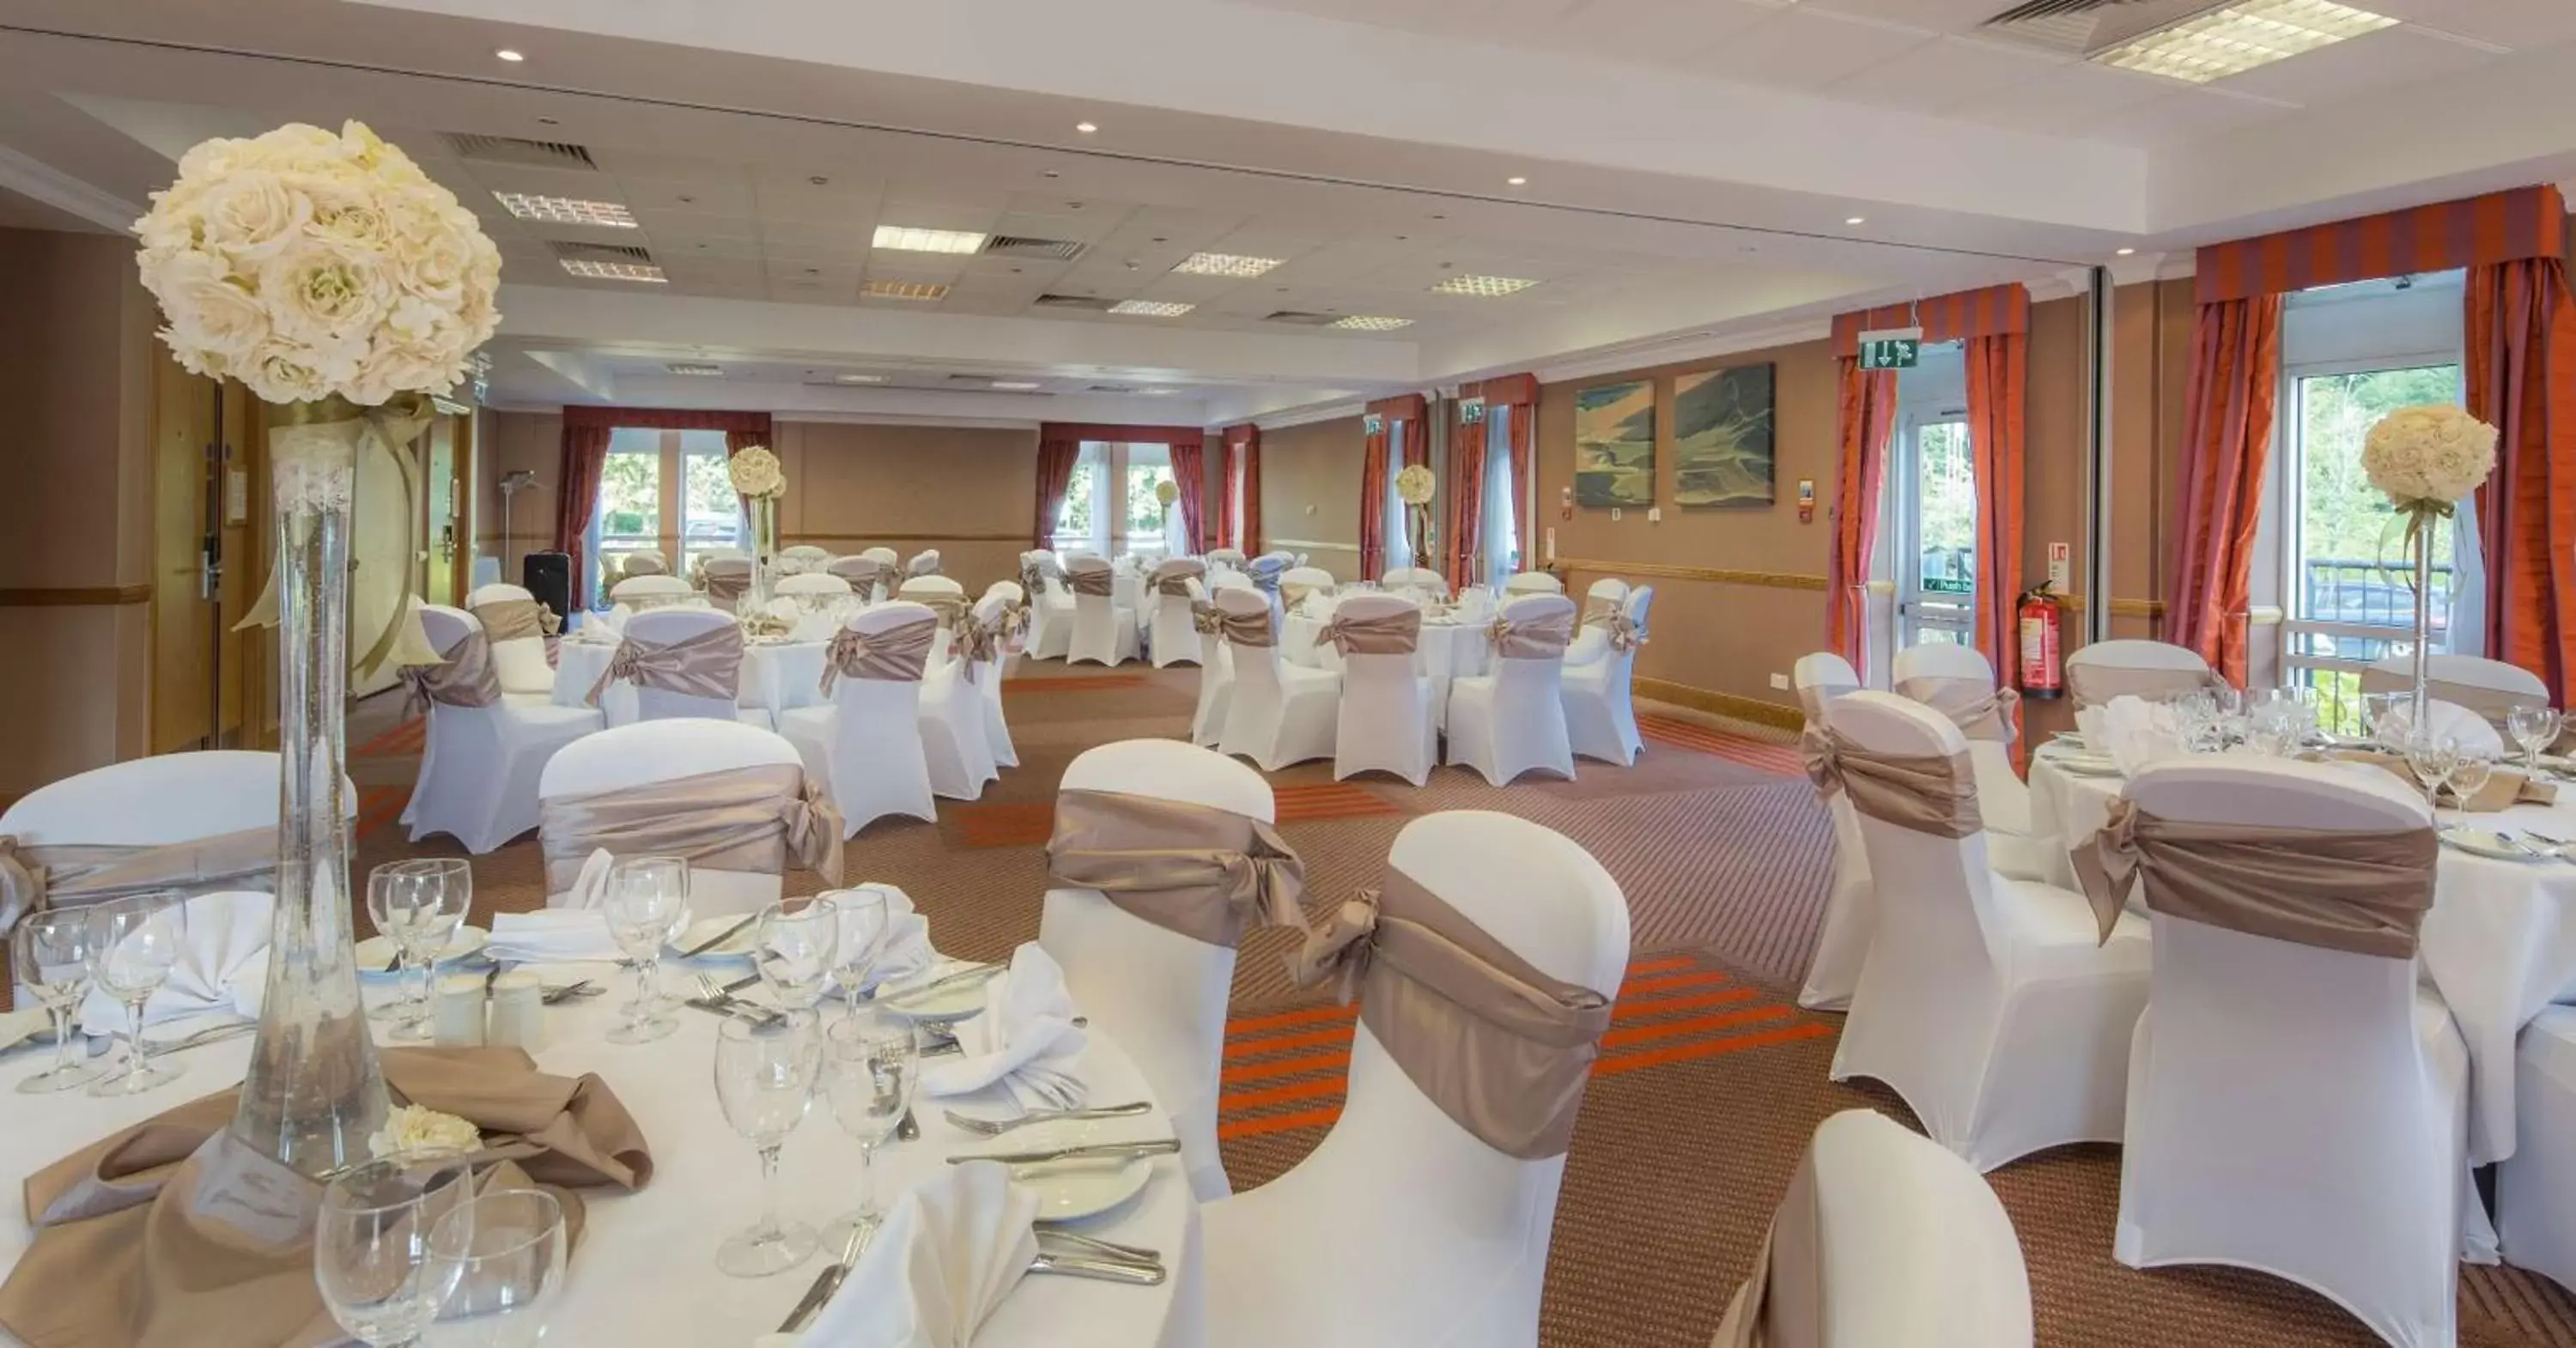 Meeting/conference room, Banquet Facilities in Hilton Leicester Hotel